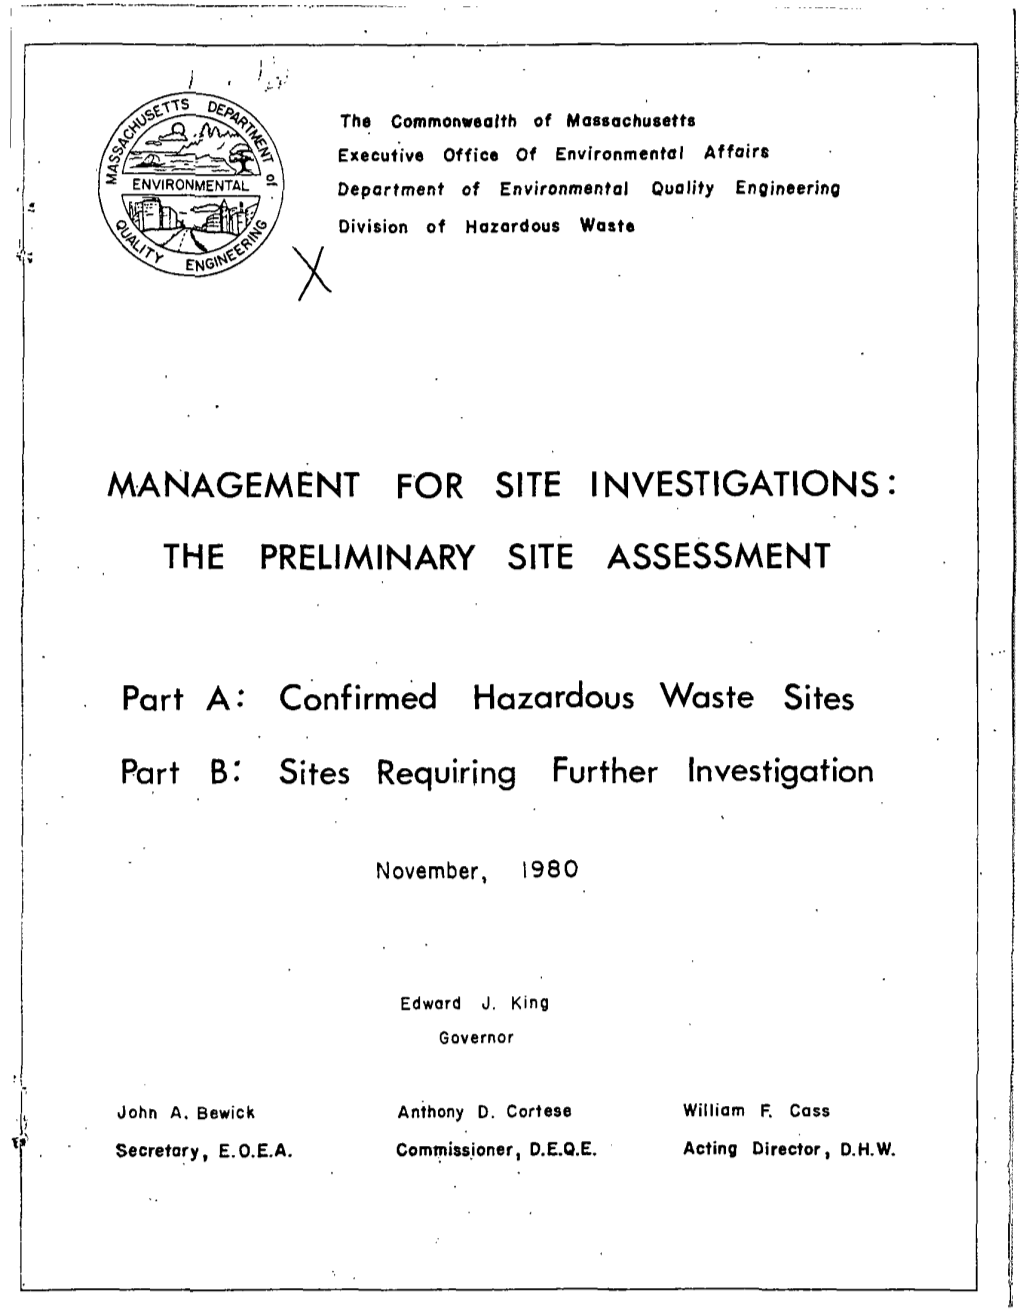 Confirmed Hazardous Waste Sites and Sites Requiring Further Investigation